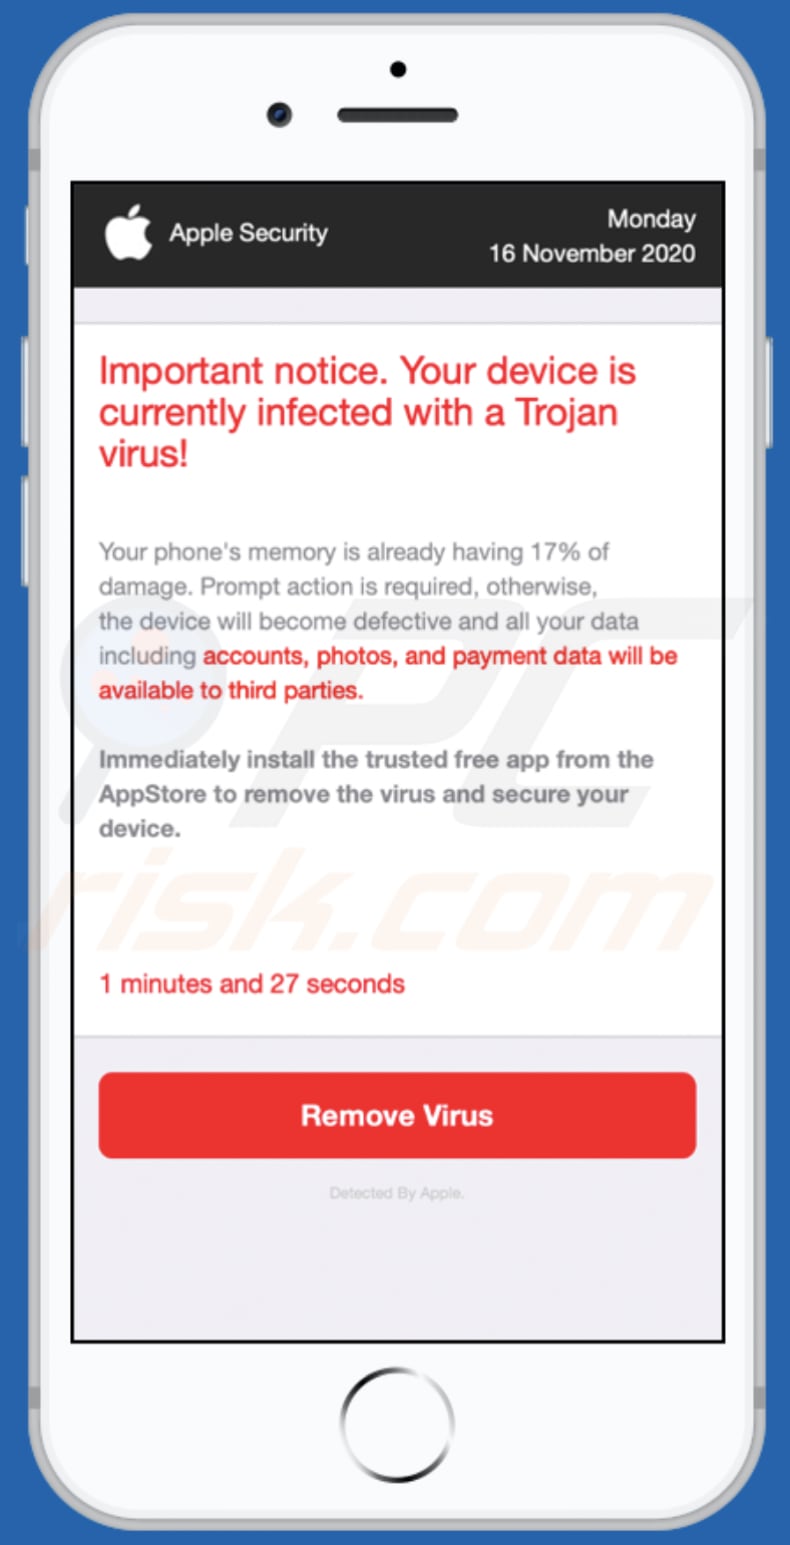 oc-protection.com pop-up scam background page